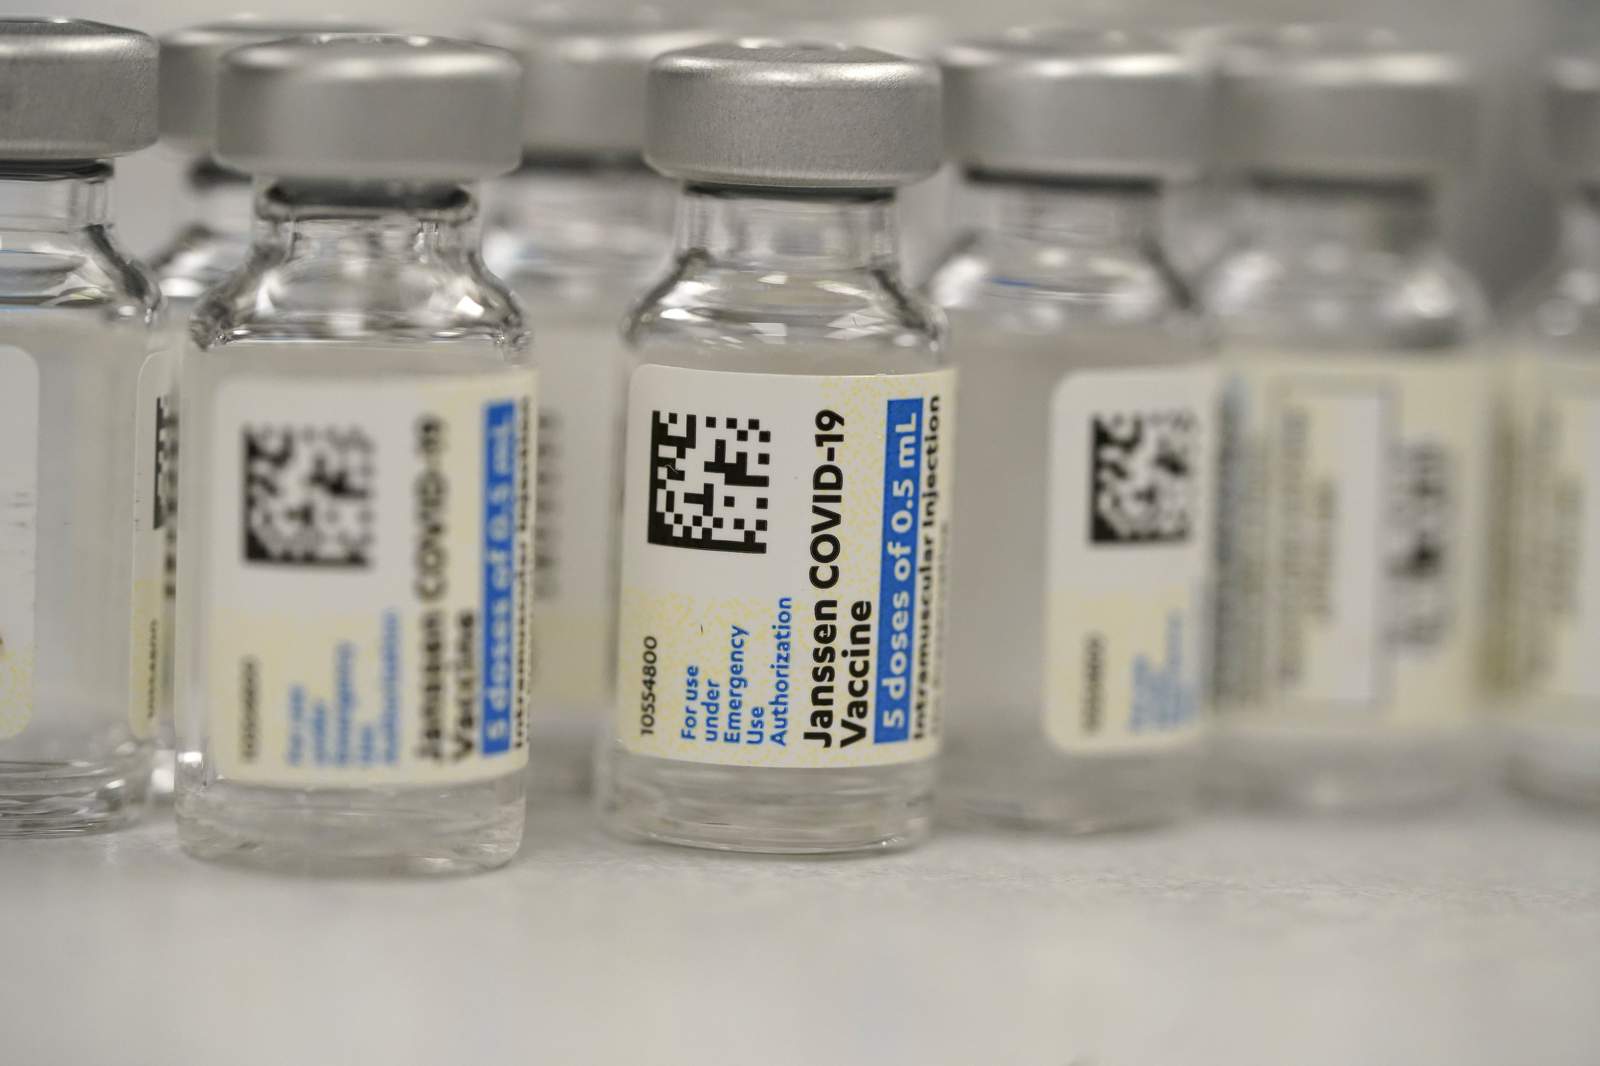 More than 800,000 first doses of the COVID-19 vaccine arriving in Texas this week